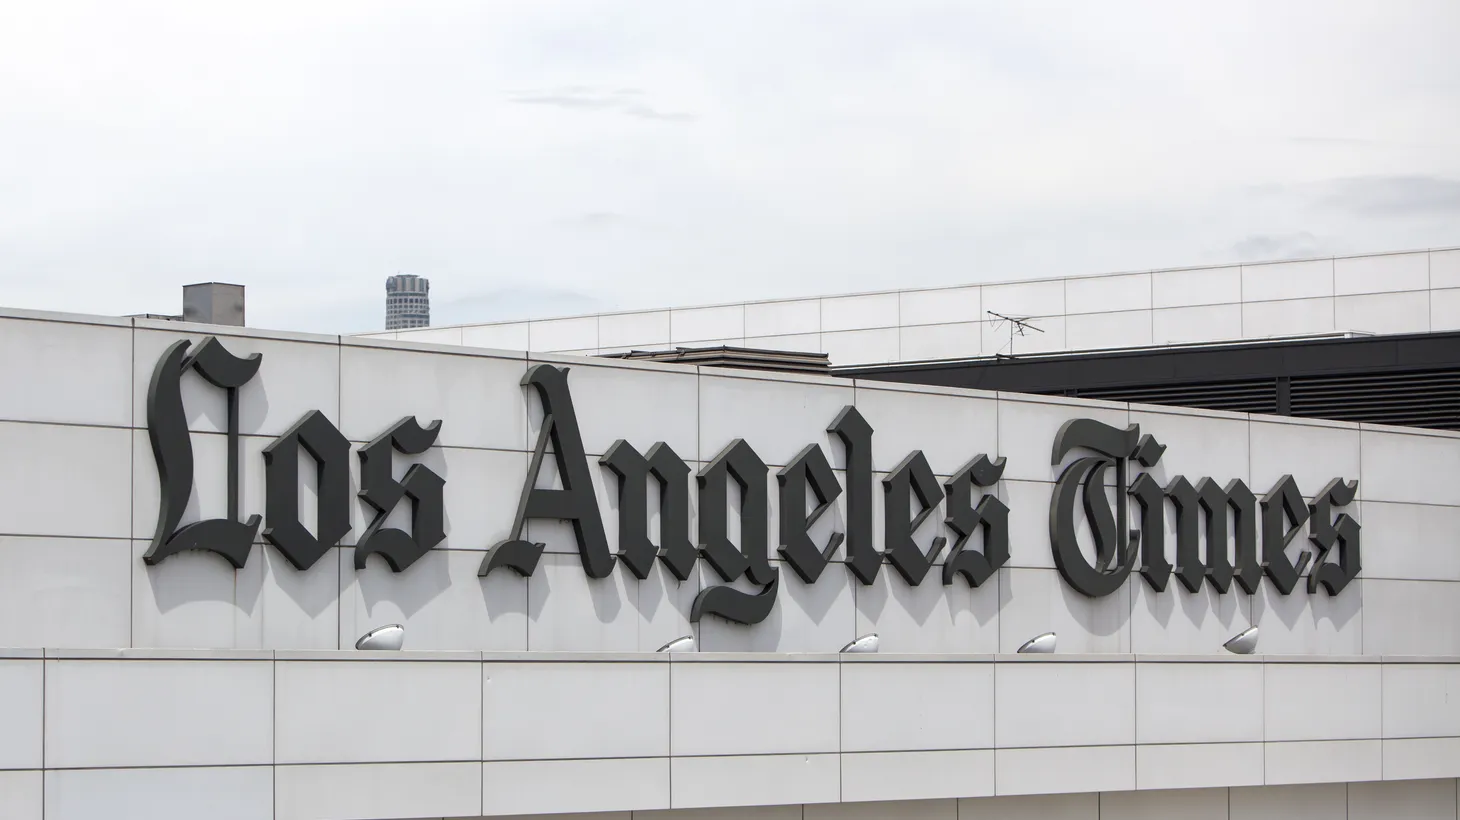 The LA Times is at a financial inflection point as it reexamines its place in the media landscape, says NPR’s David Folkenflik.